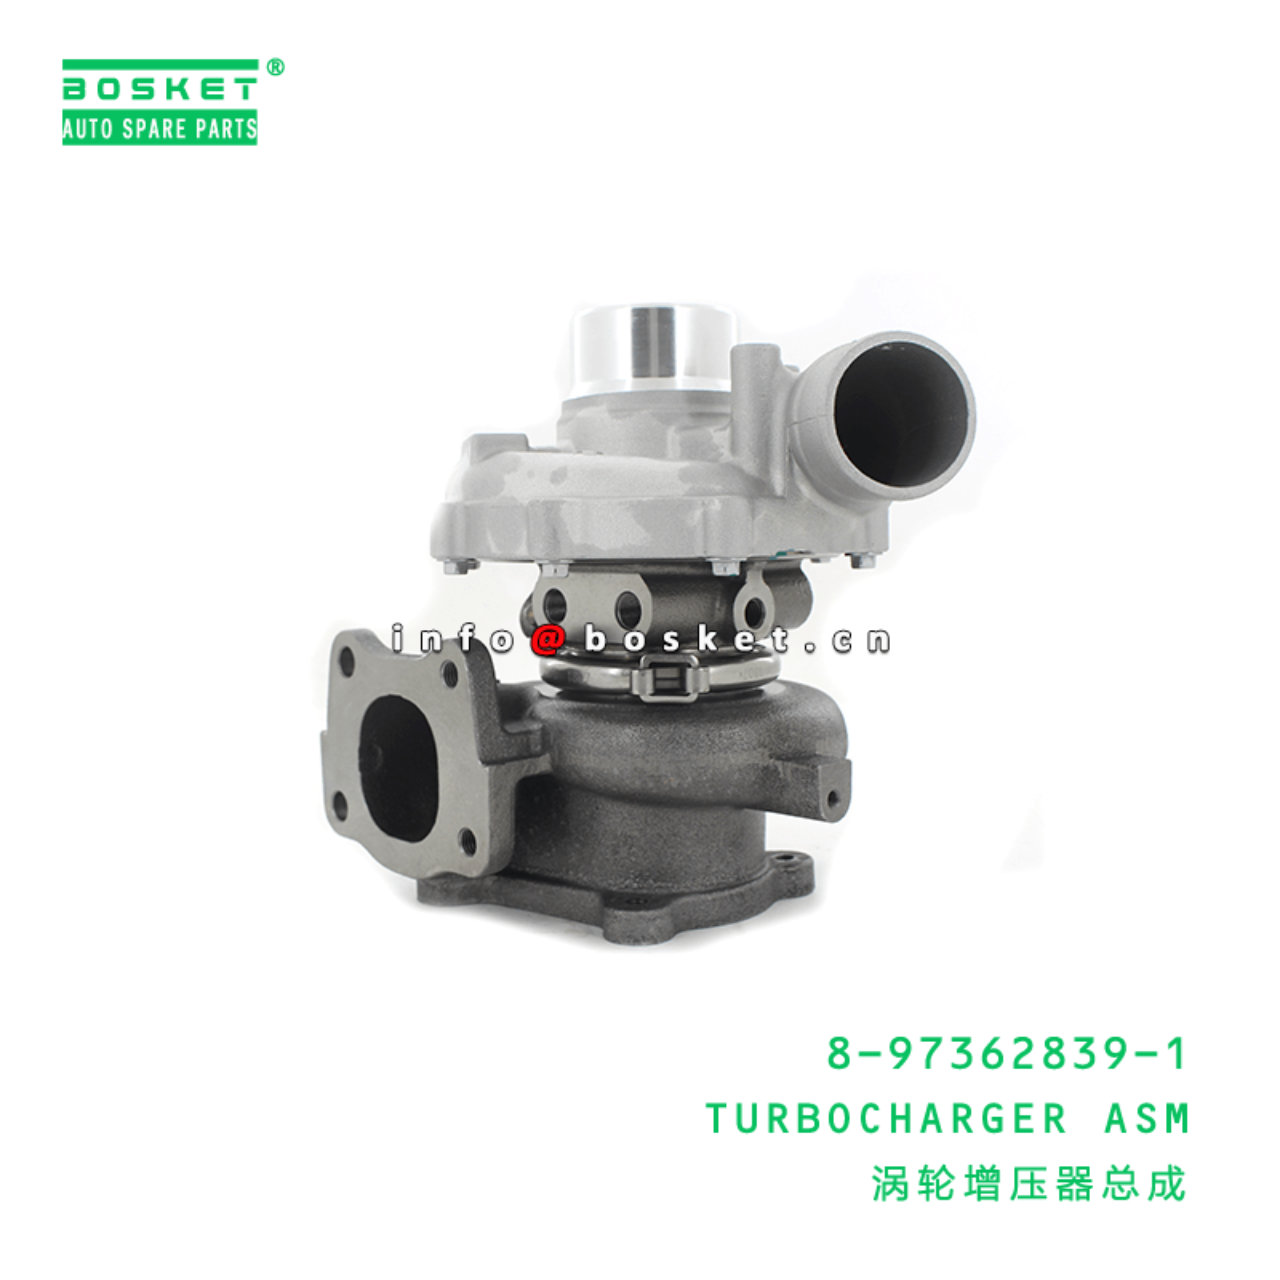  8-97362839-1 Turbocharger Assembly 8973628391 Suitable for ISUZU XD 4HK1